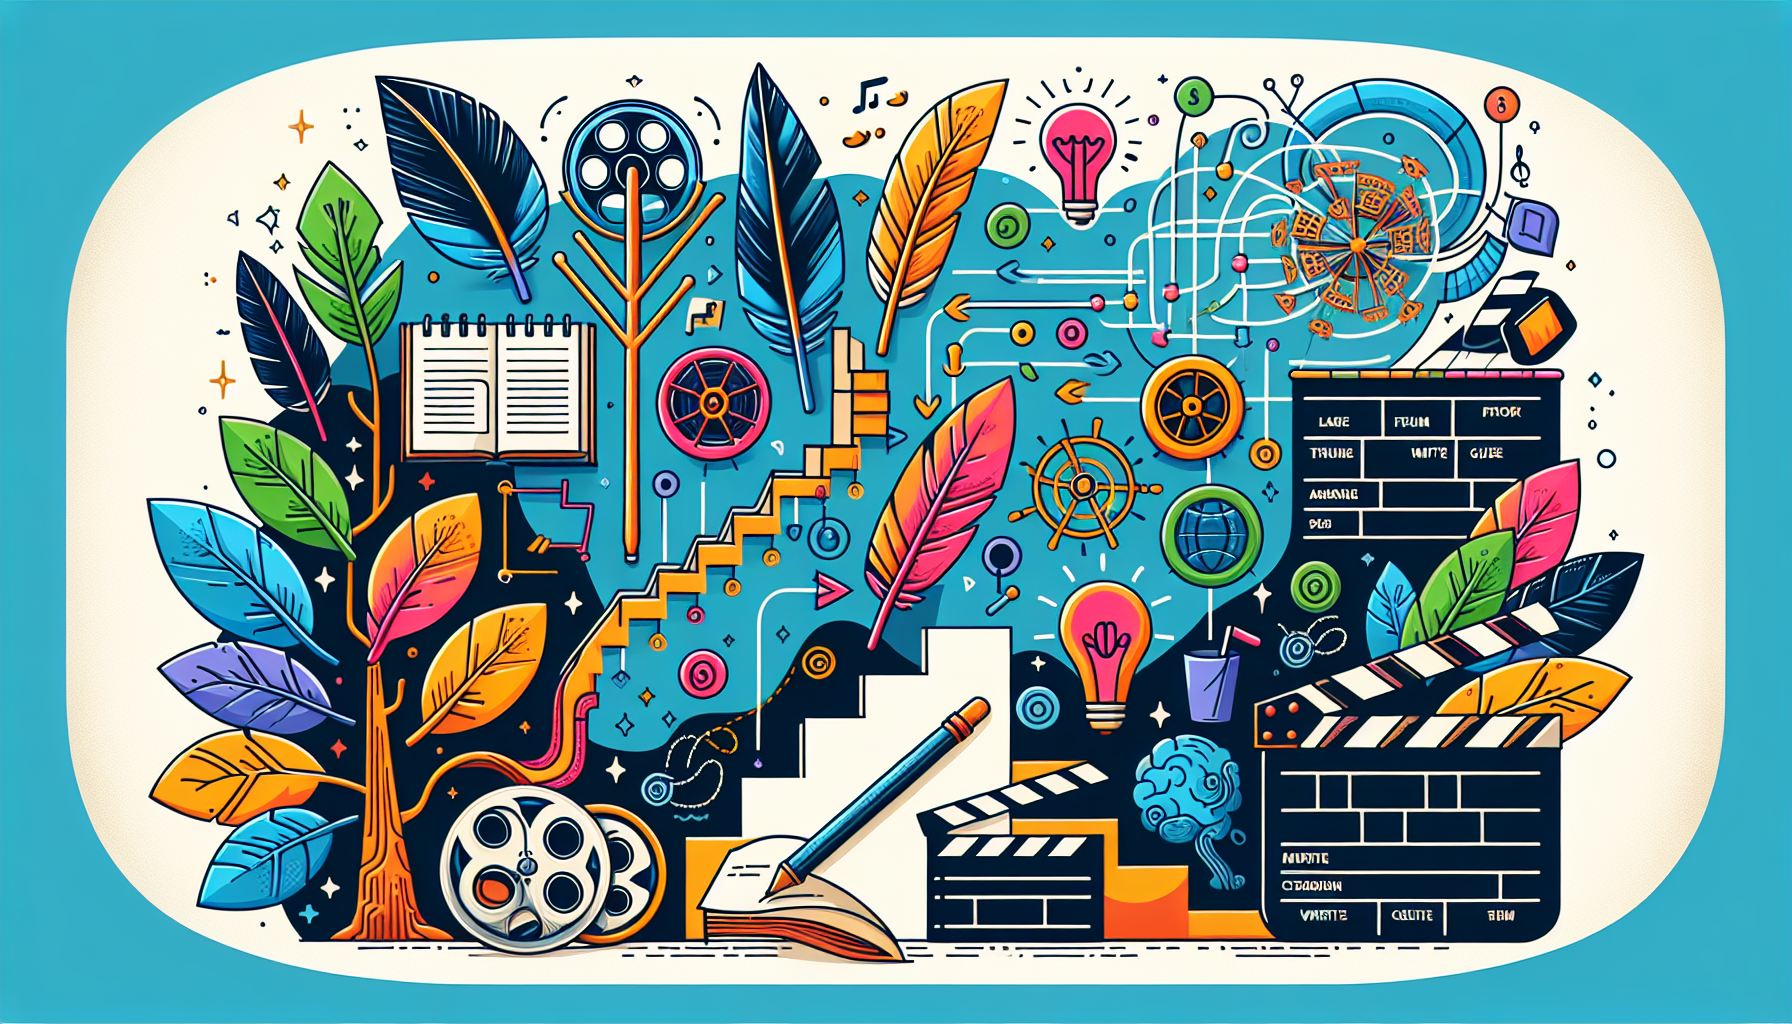 Create a colorful and modern illustration that visually symbolizes the enhancement of screenwriting skills. The image could include elements like scripts, film reels, a feather quill to represent writing, a clapperboard, and creative brainstorming tools such as mind maps or flowcharts. Remember to incorporate elements that suggest progression or improvement, such as a staircase, a tree growing, or an upward trending graph.